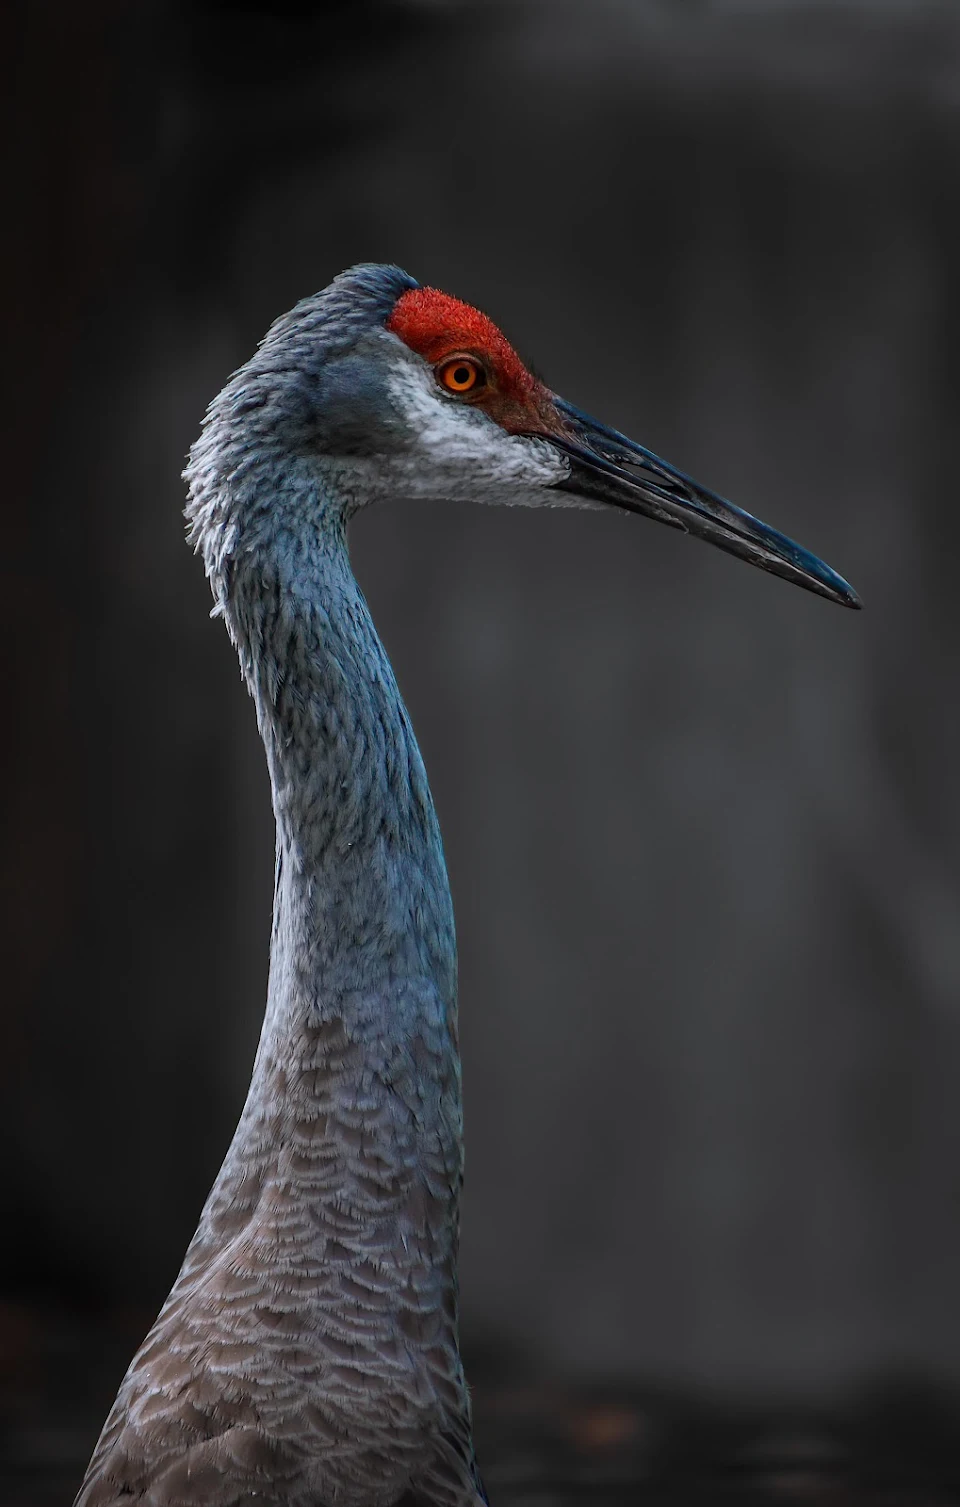 Seeing Red - A portrait I took of a sandhill crane.